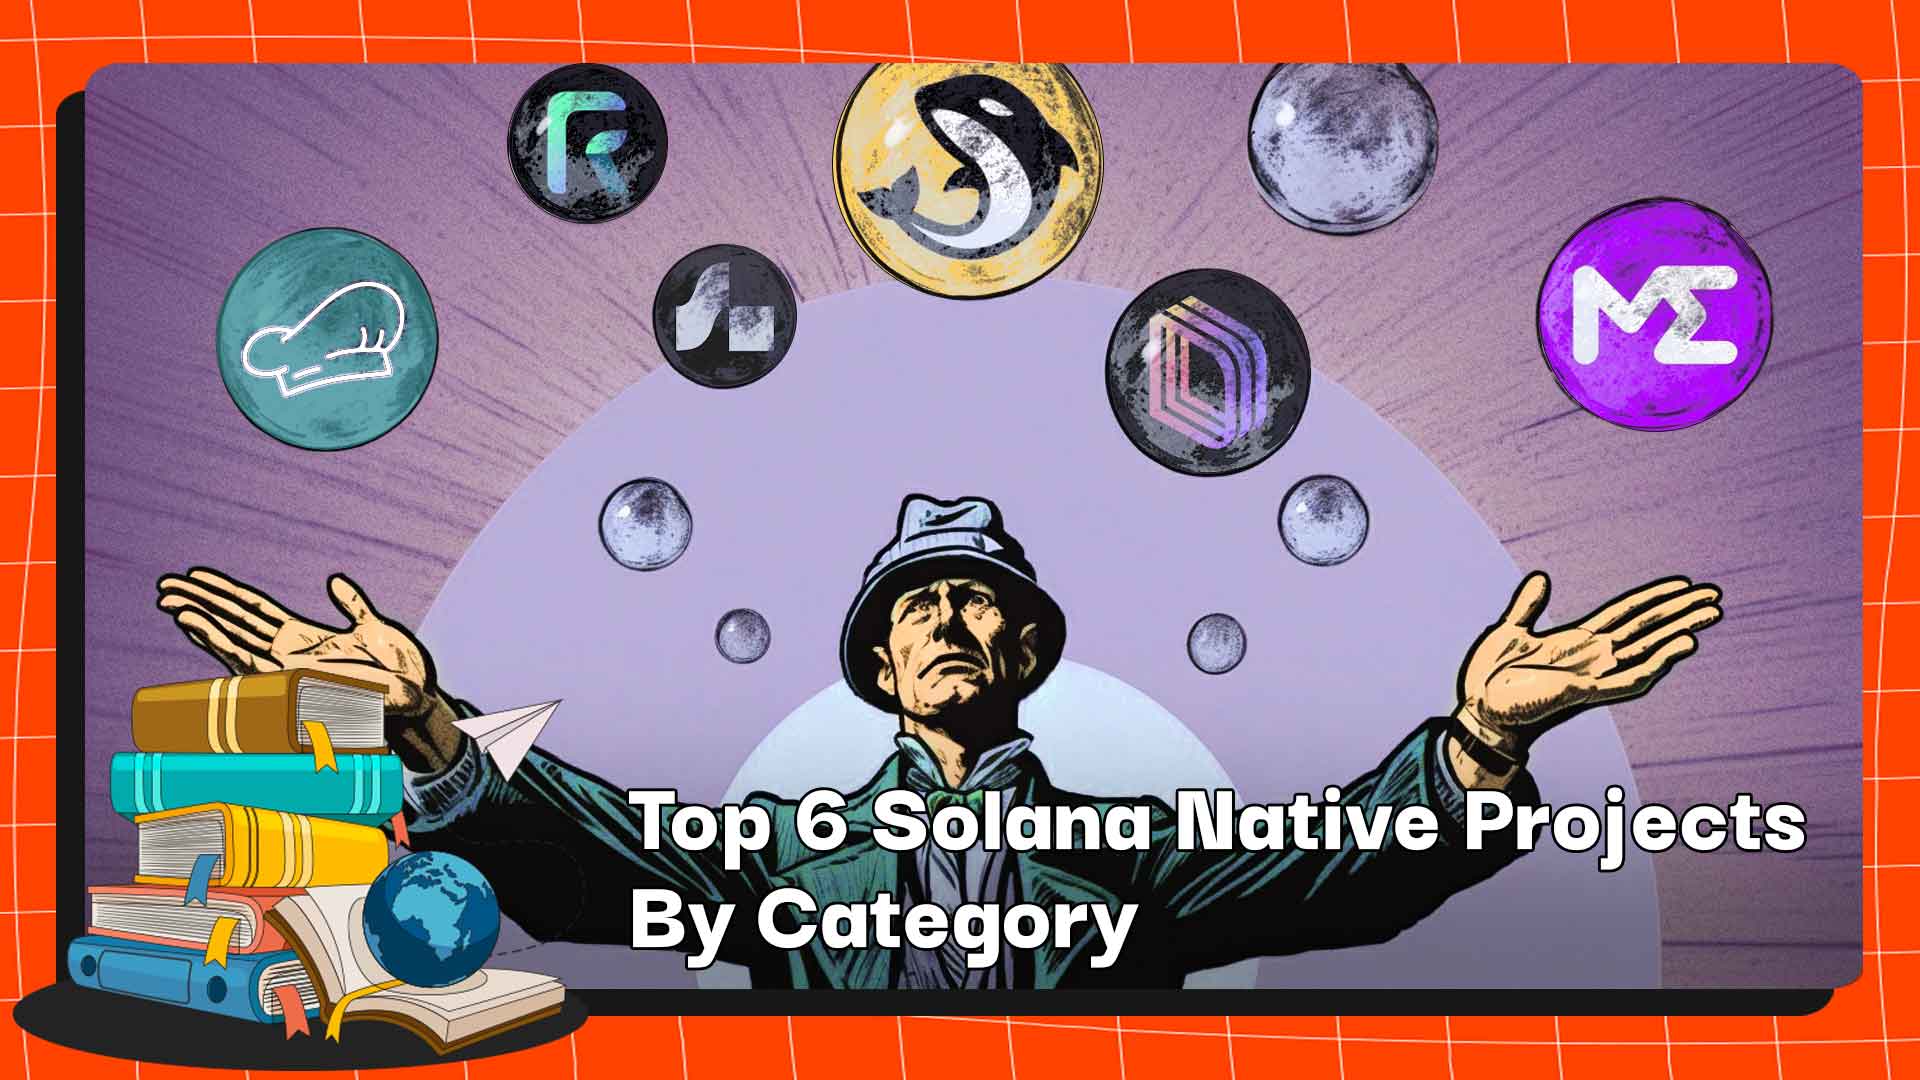 Top 6 Solana Native Projects By Category